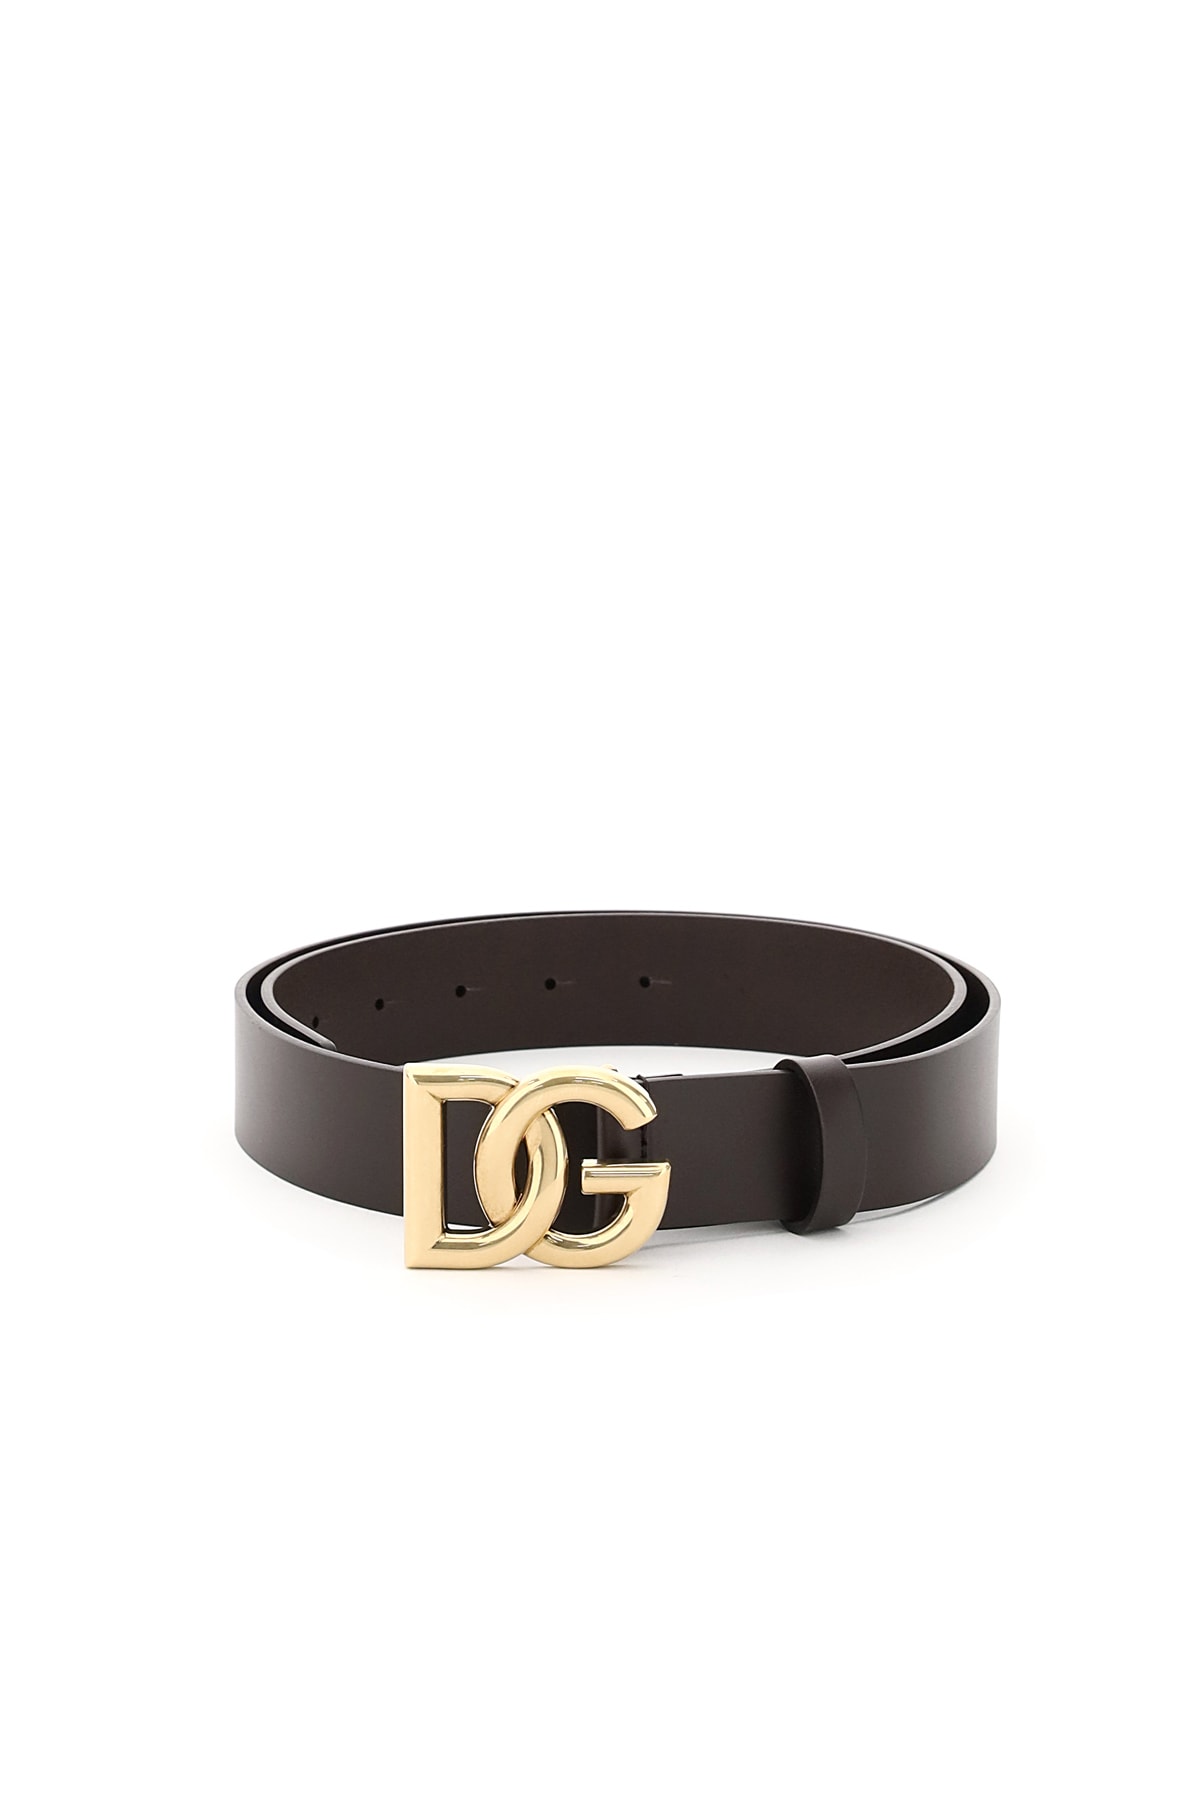 DOLCE & GABBANA LUX LEATHER BELT WITH CROSSED DG LOGO